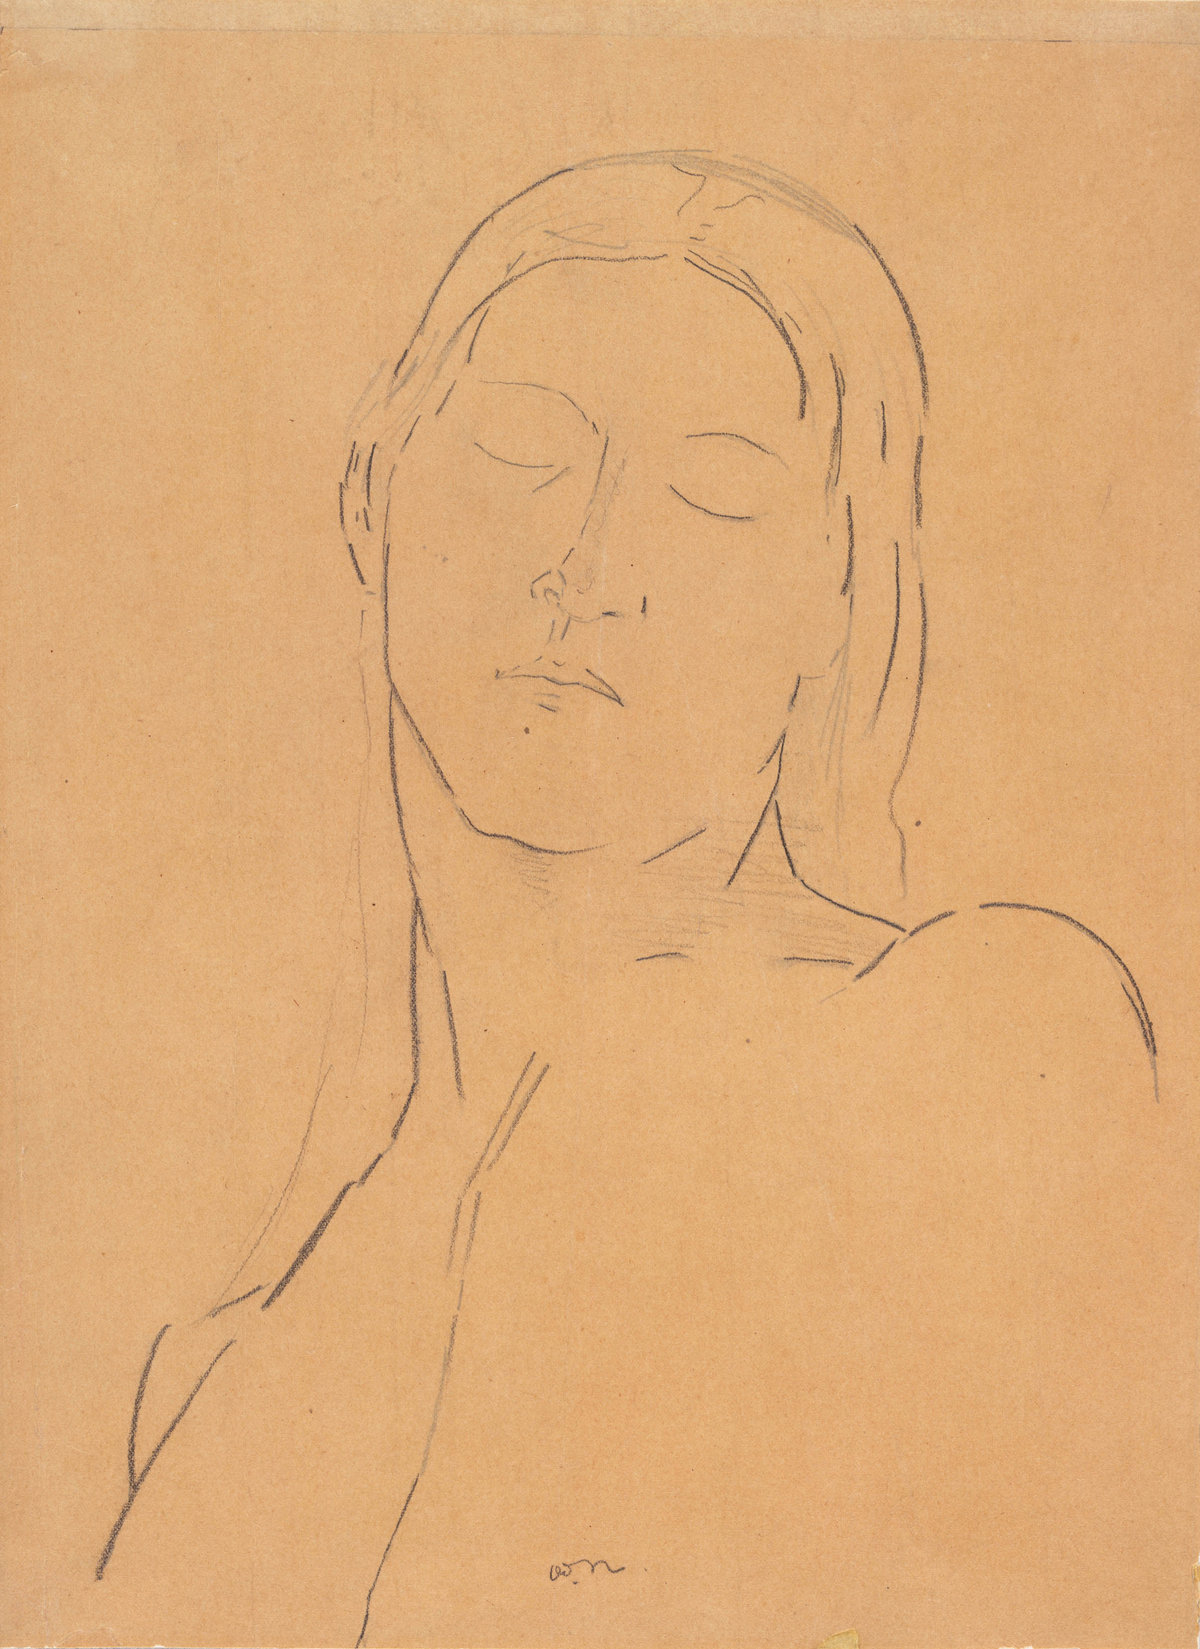 Odilon Redon, Closed Eyes (Camille Redon), 1890. Graphite, black chalk and lithographic chalk on transfer paper, 35.7 × 26.1 cm. Museum of Modern Art, New York, Gift of the Ian Woodner Family Collection